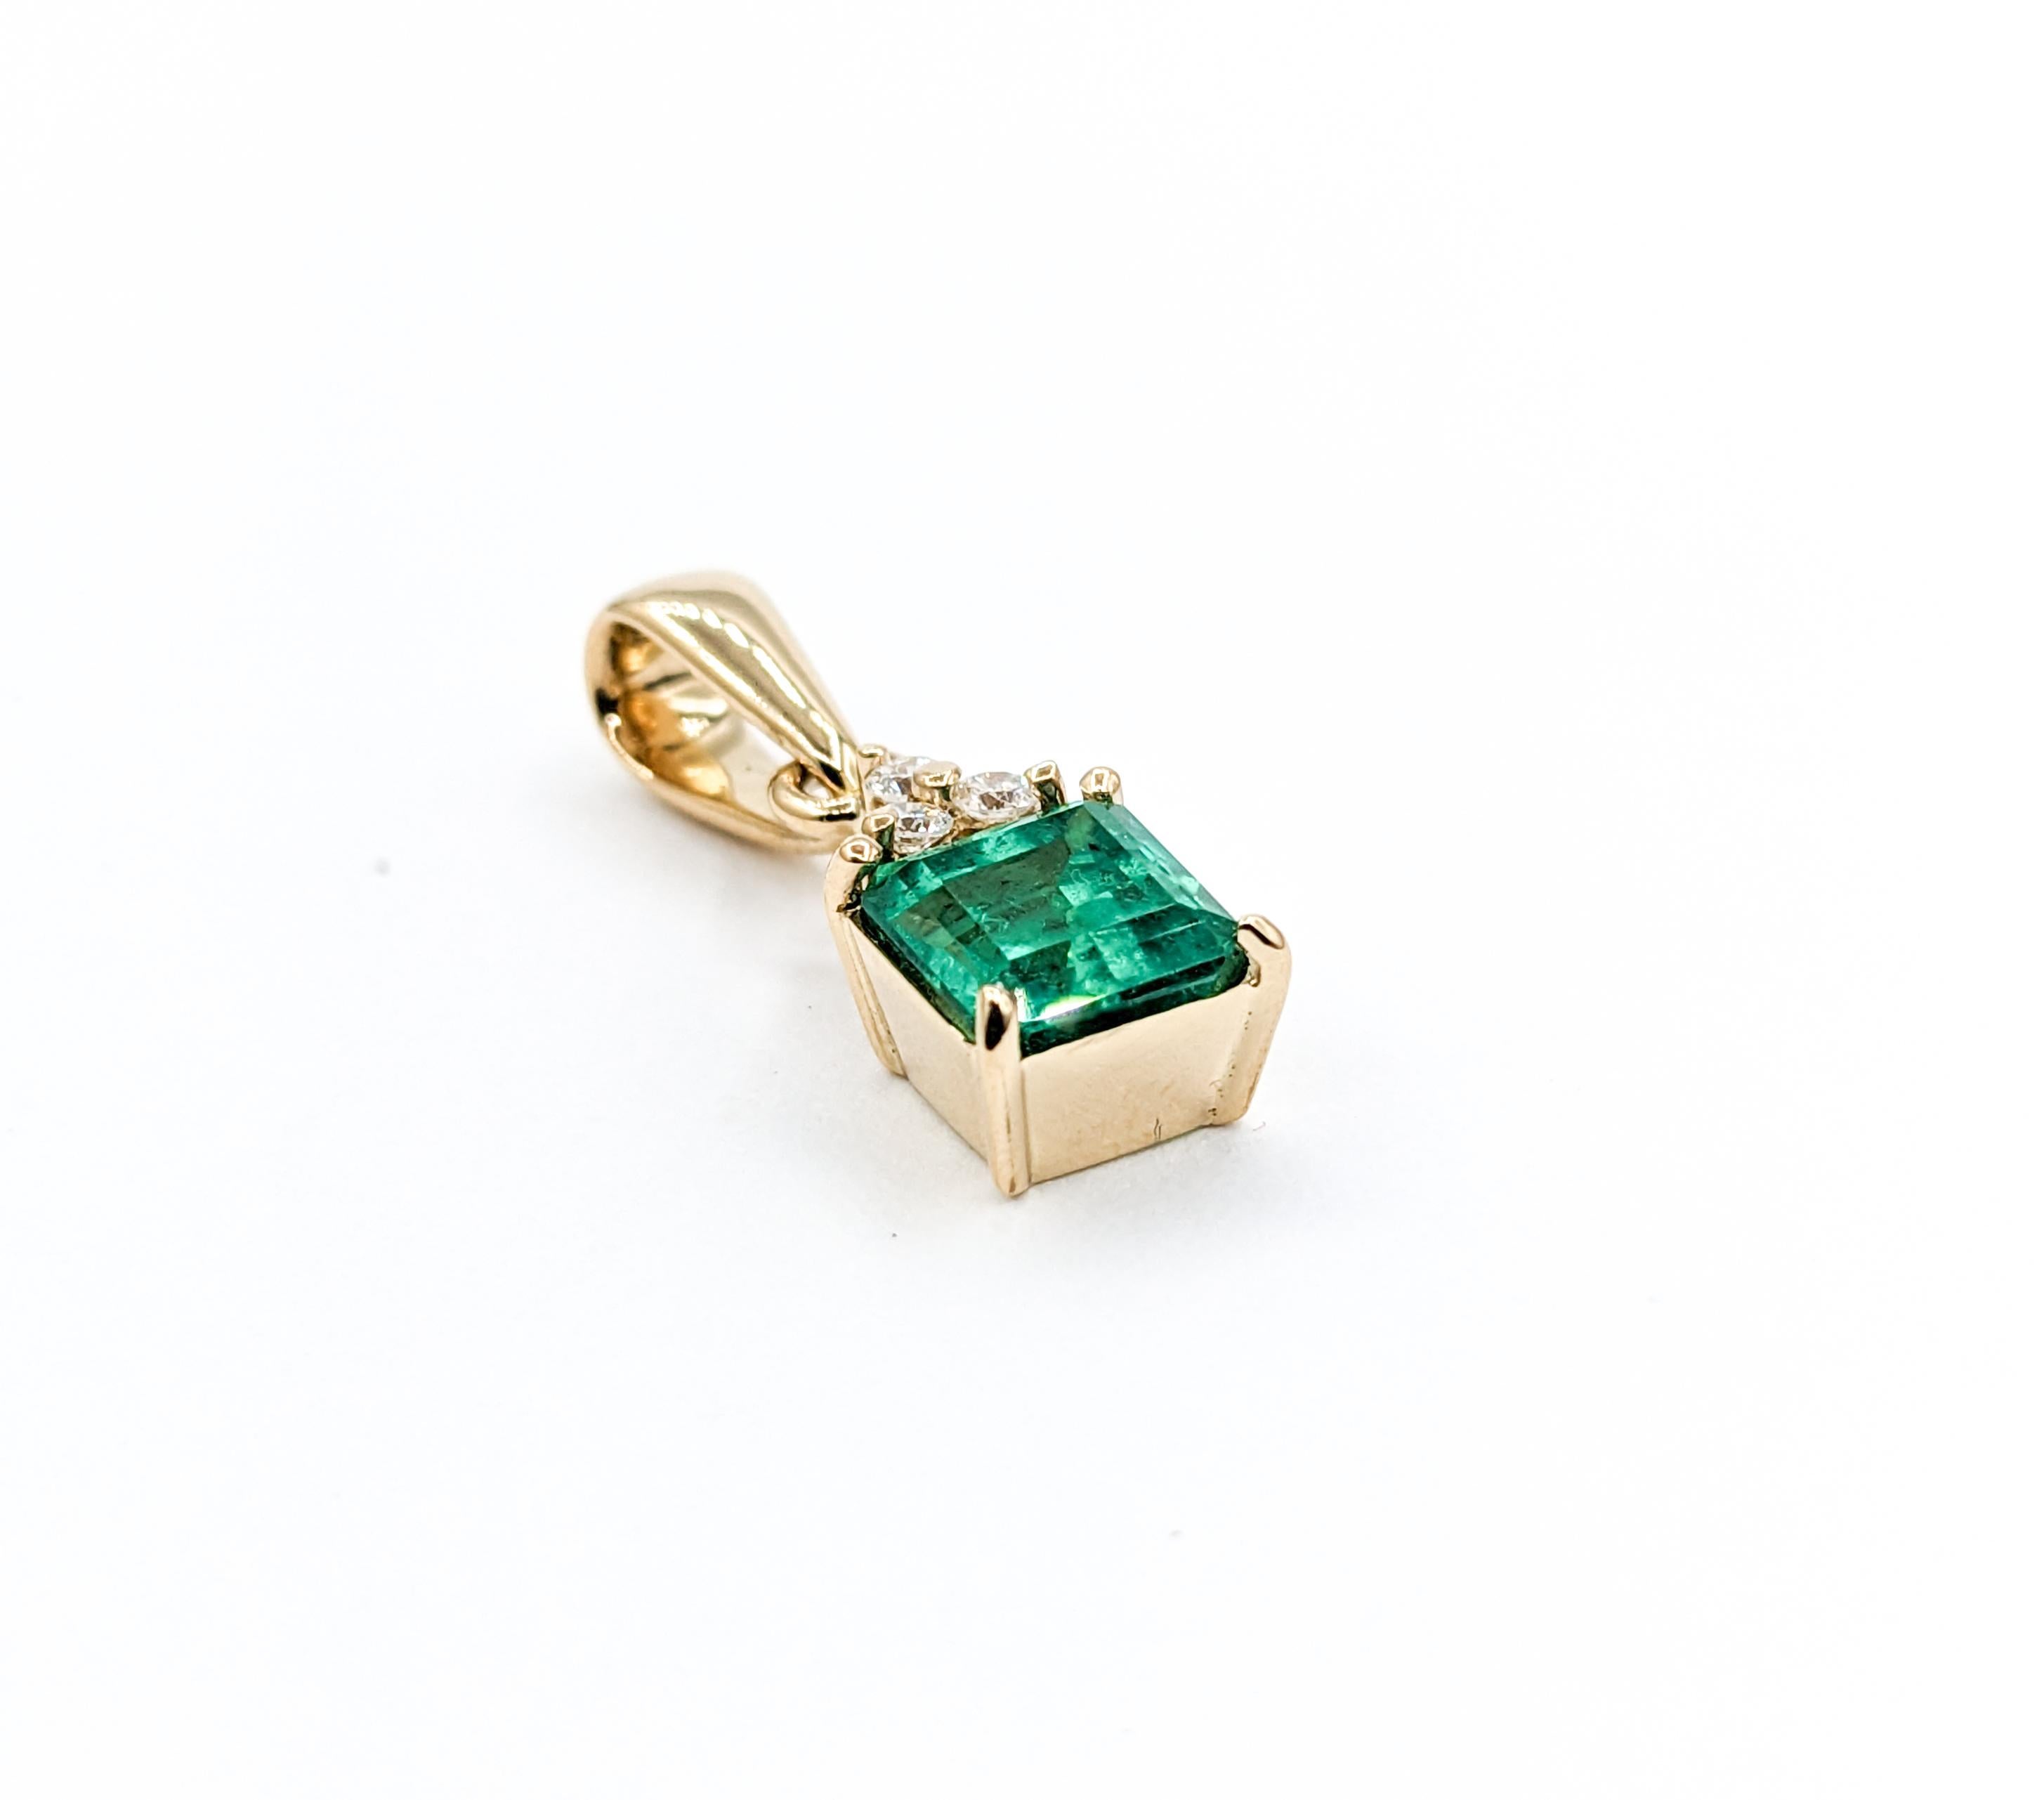 Stunning GIA Certified Columbian Emerald & Diamond Pendant in 18K Gold

Indulge in timeless elegance with this exquisite Columbian emerald pendant, meticulously crafted in luxurious 18-karat yellow gold. The pendant also boasts a magnificent